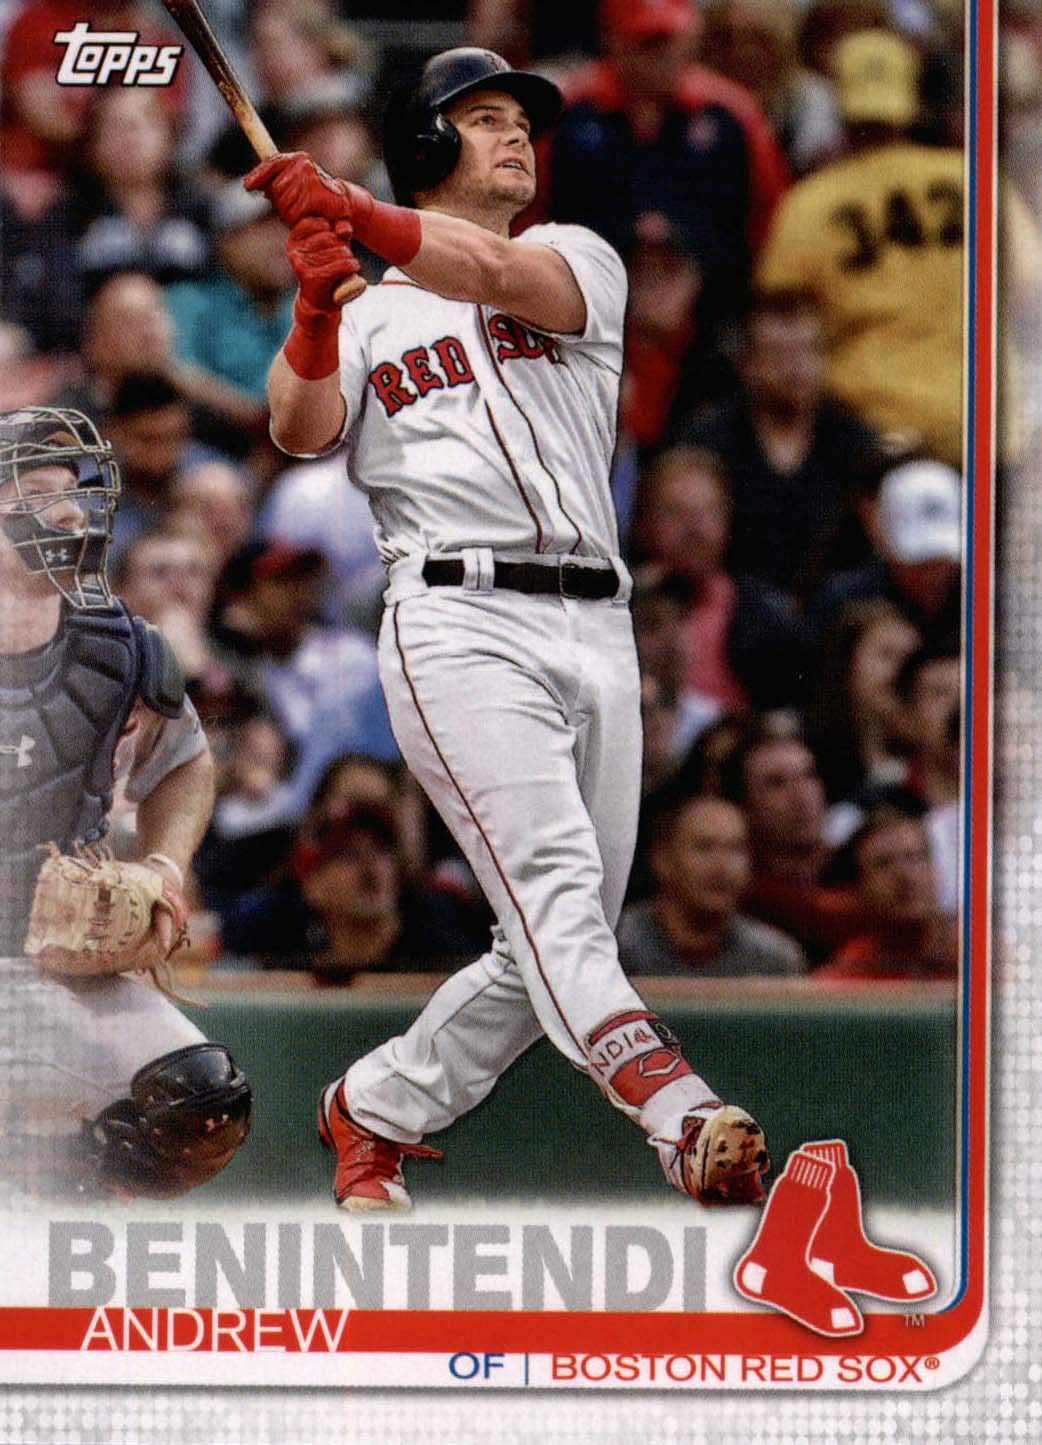 Boston Red Sox 2019 Topps Factory Sealed Limited Edition 17 Card Team Set with Dustin Pedroia and Mookie Betts Plus